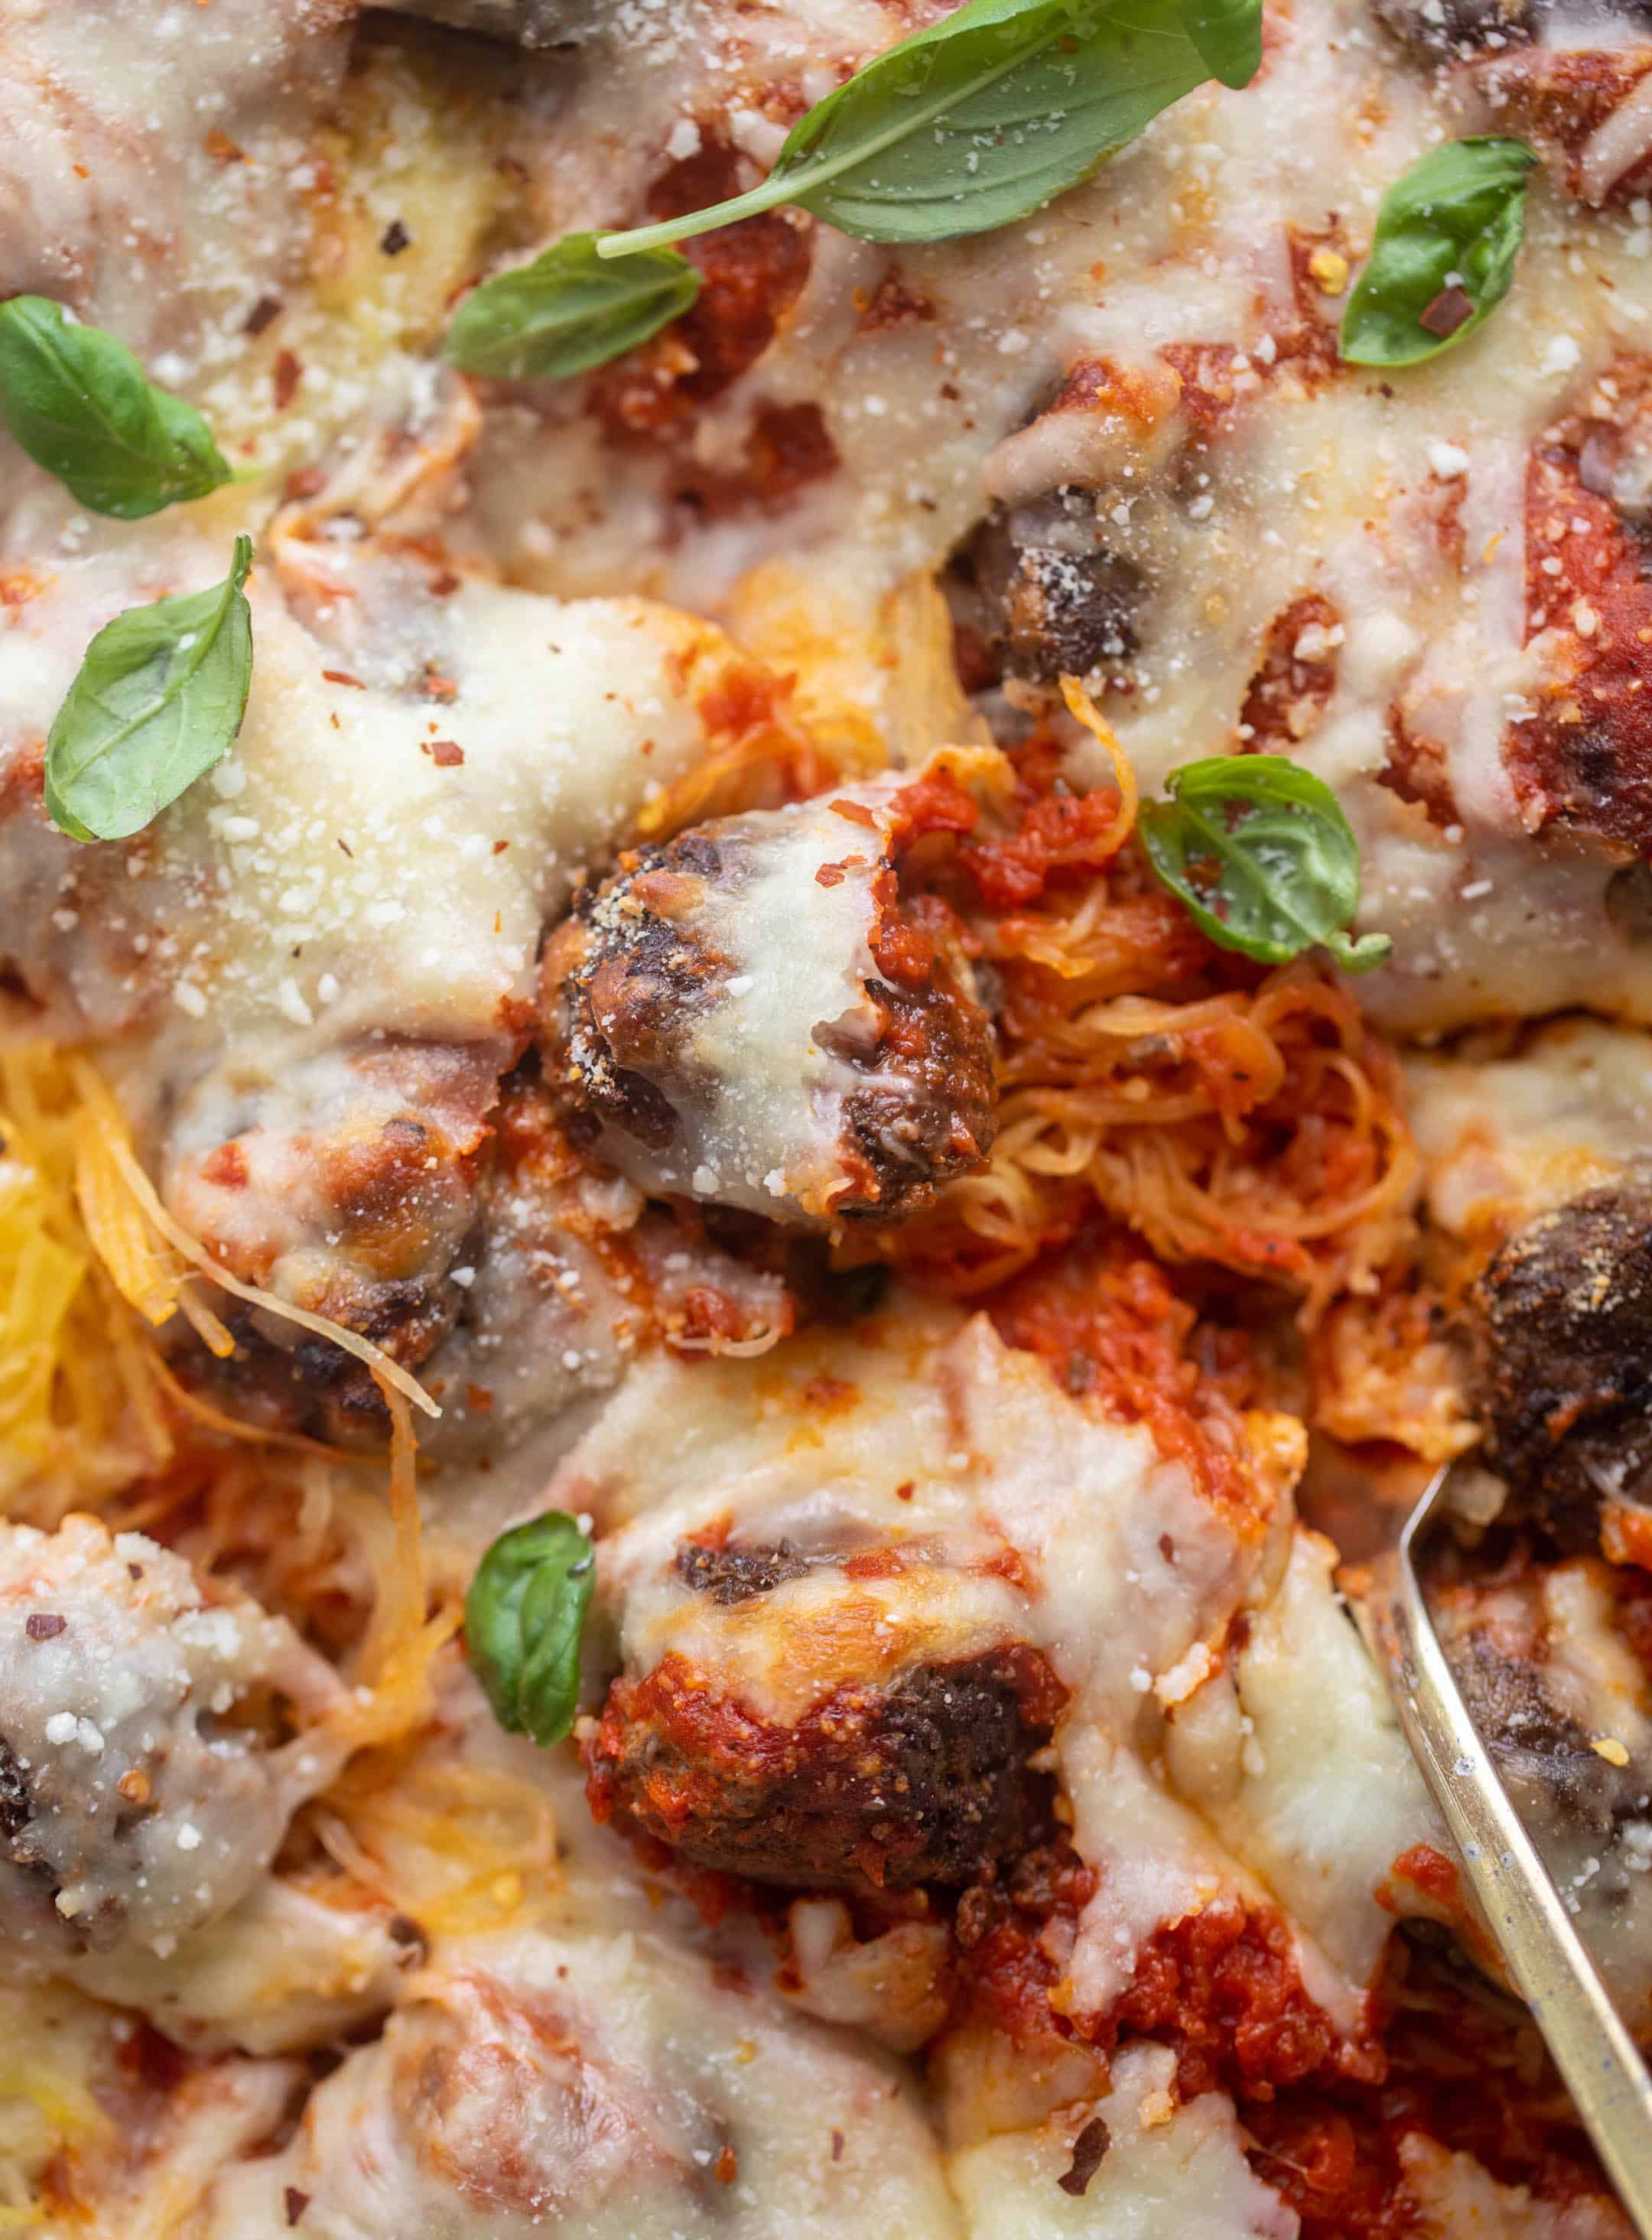 Baked Spaghetti Squash and Meatballs.